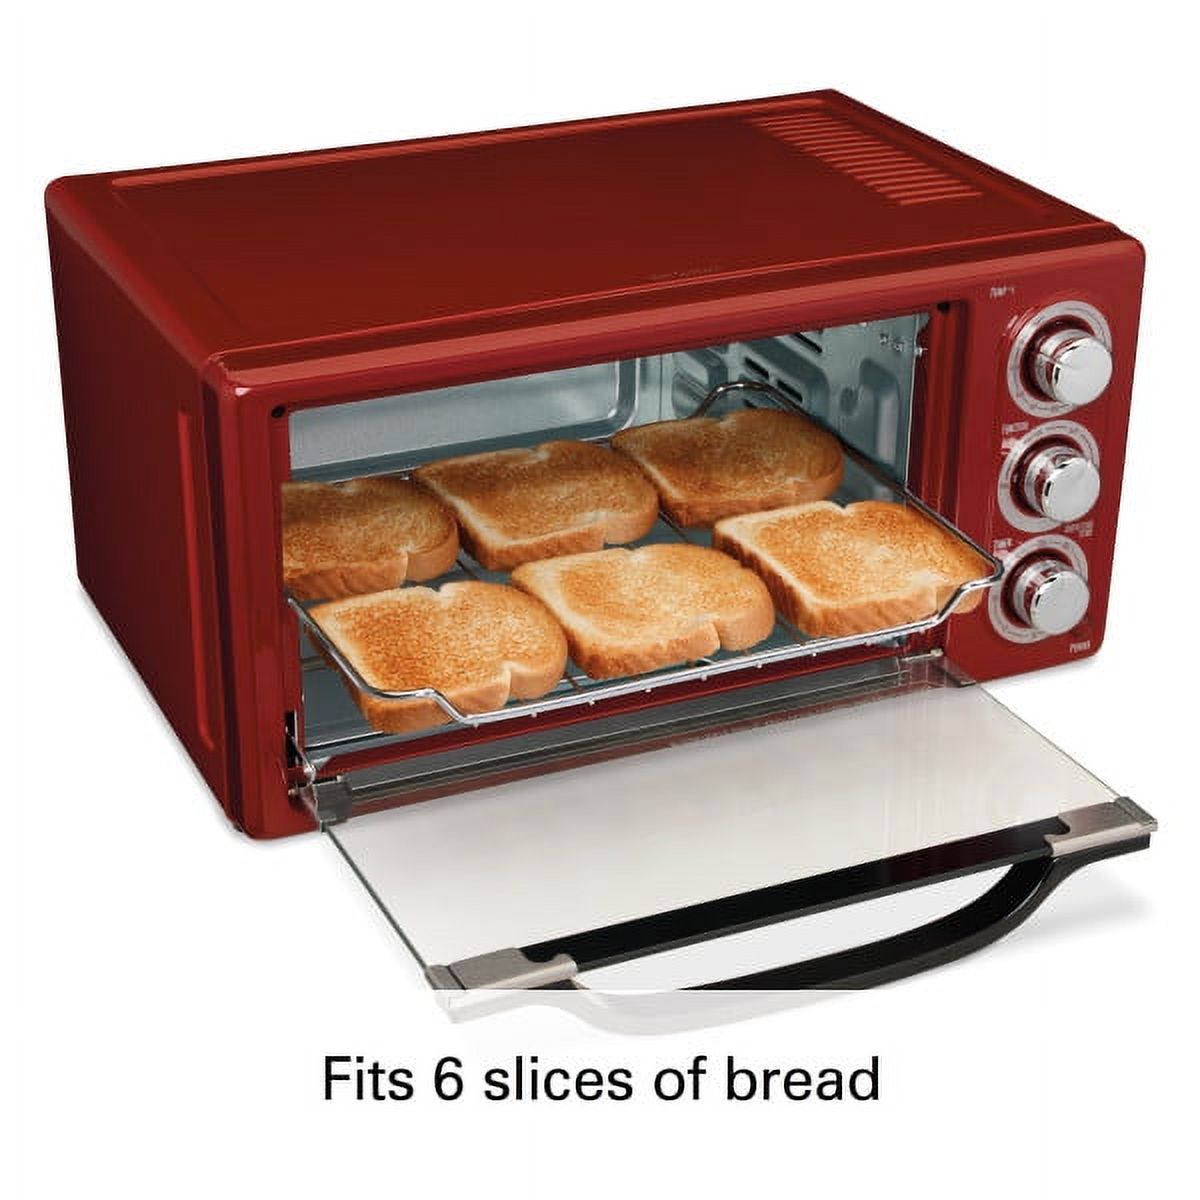 Hamilton Beach 6 Slice Toaster Convection/Broiler Oven | Red Model# 31514 - image 2 of 6